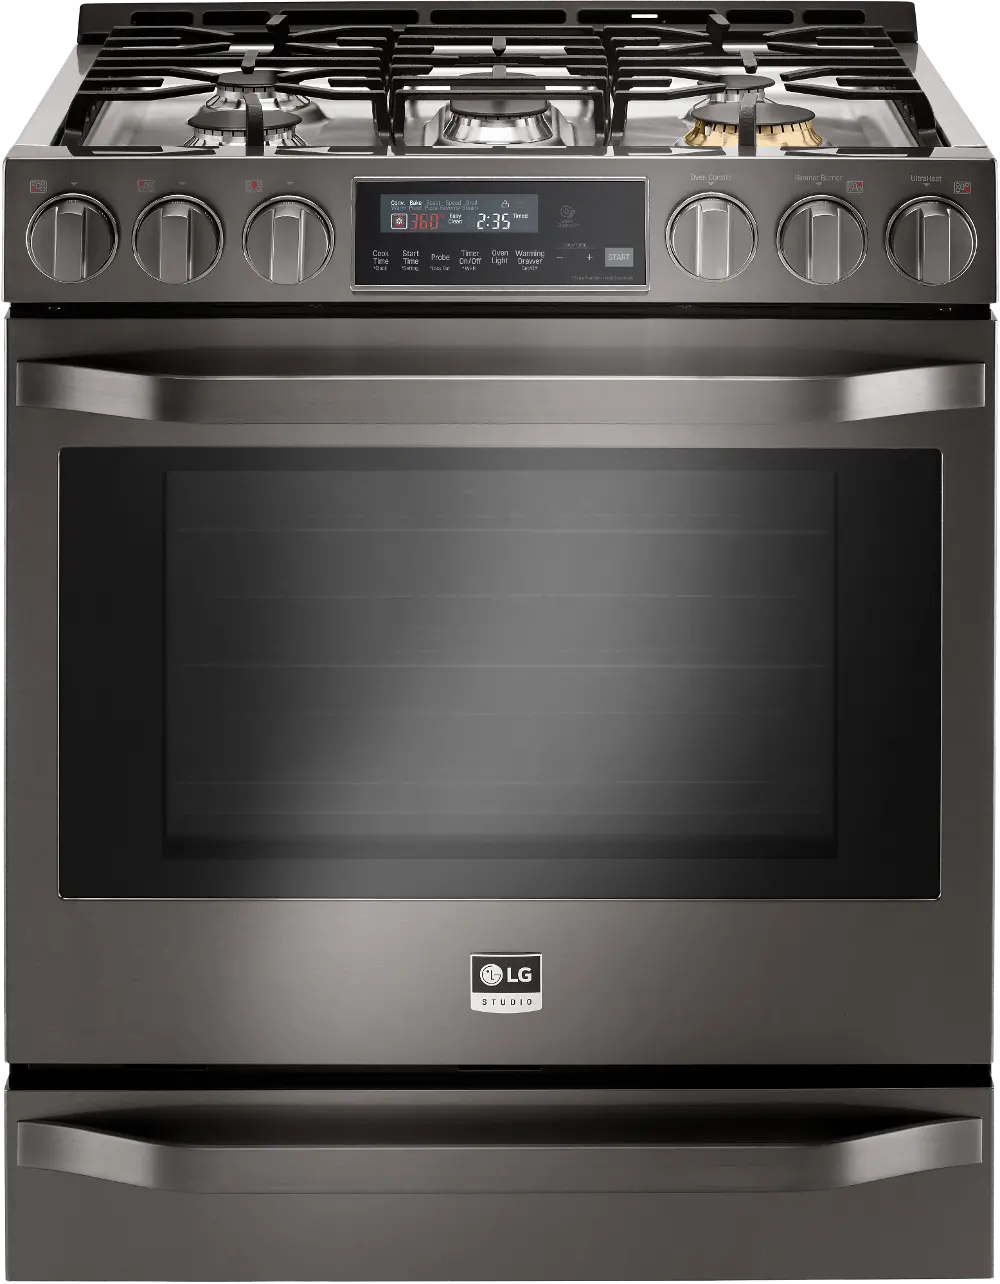 LSSG3020BD LG Studio 6.3 cu. ft. Gas Slide-in Smart Range with Convection Cooking - Black Stainless Steel-1